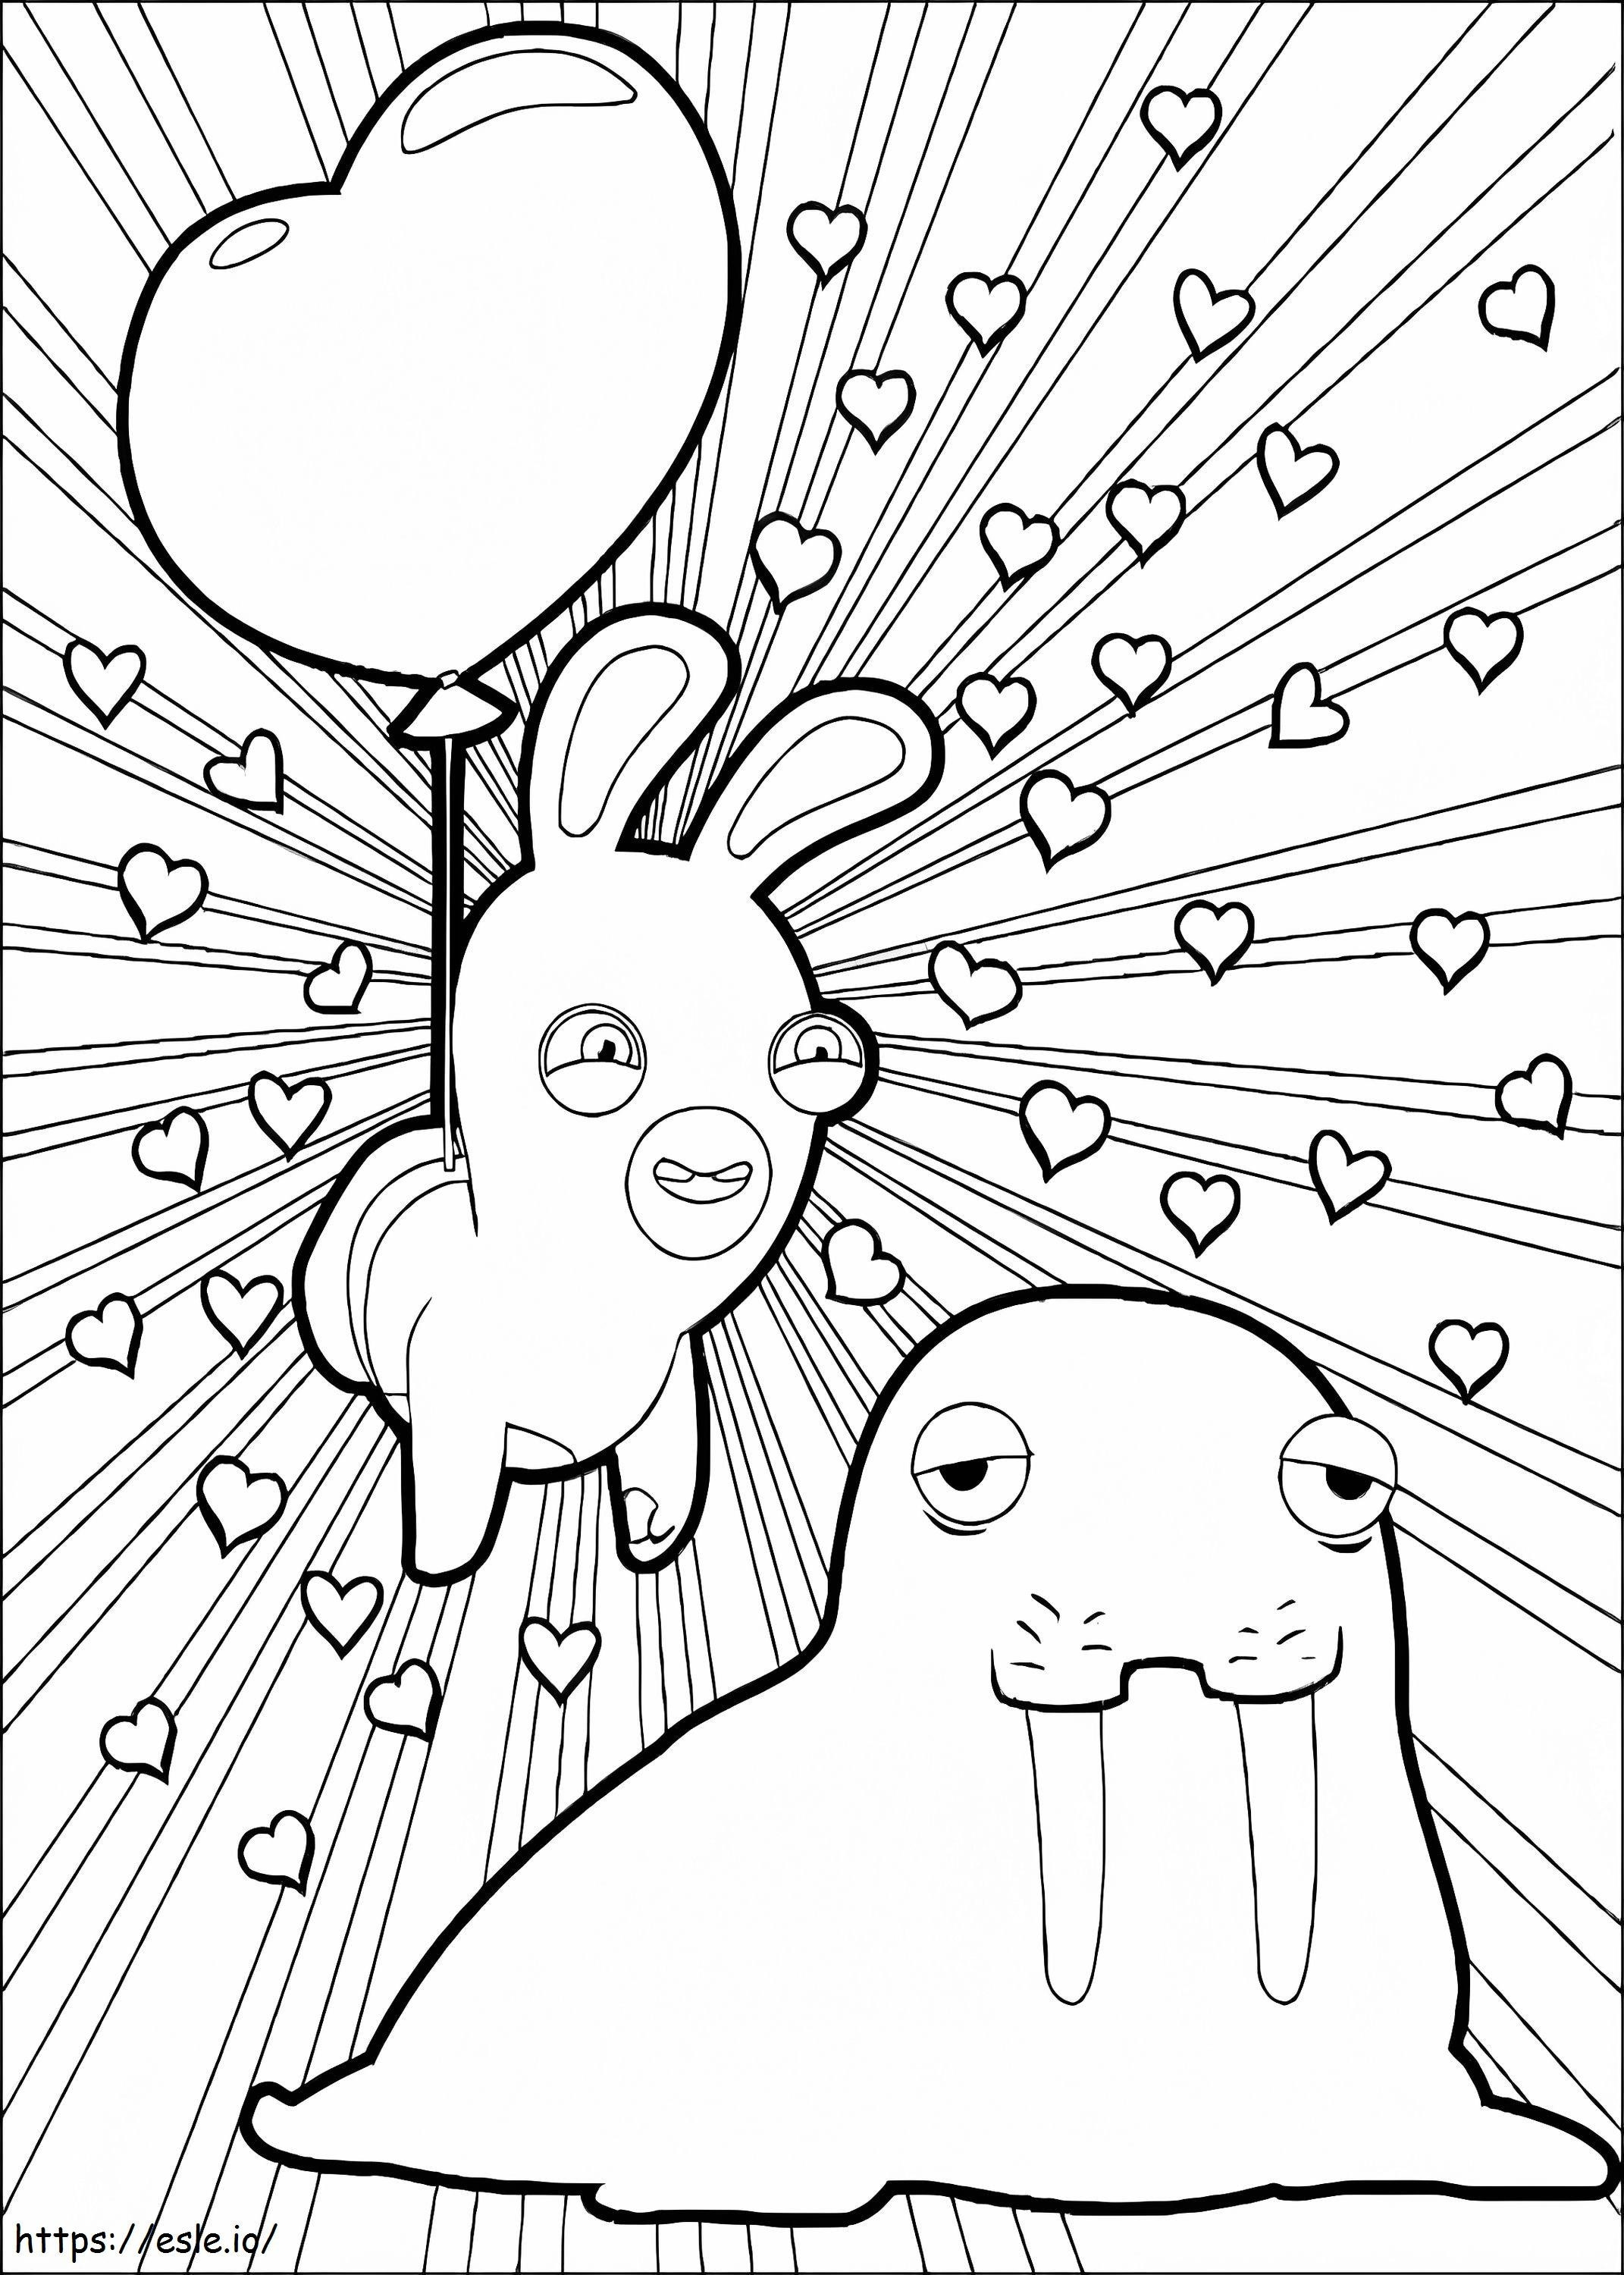 Raving Rabbids And Walrus coloring page